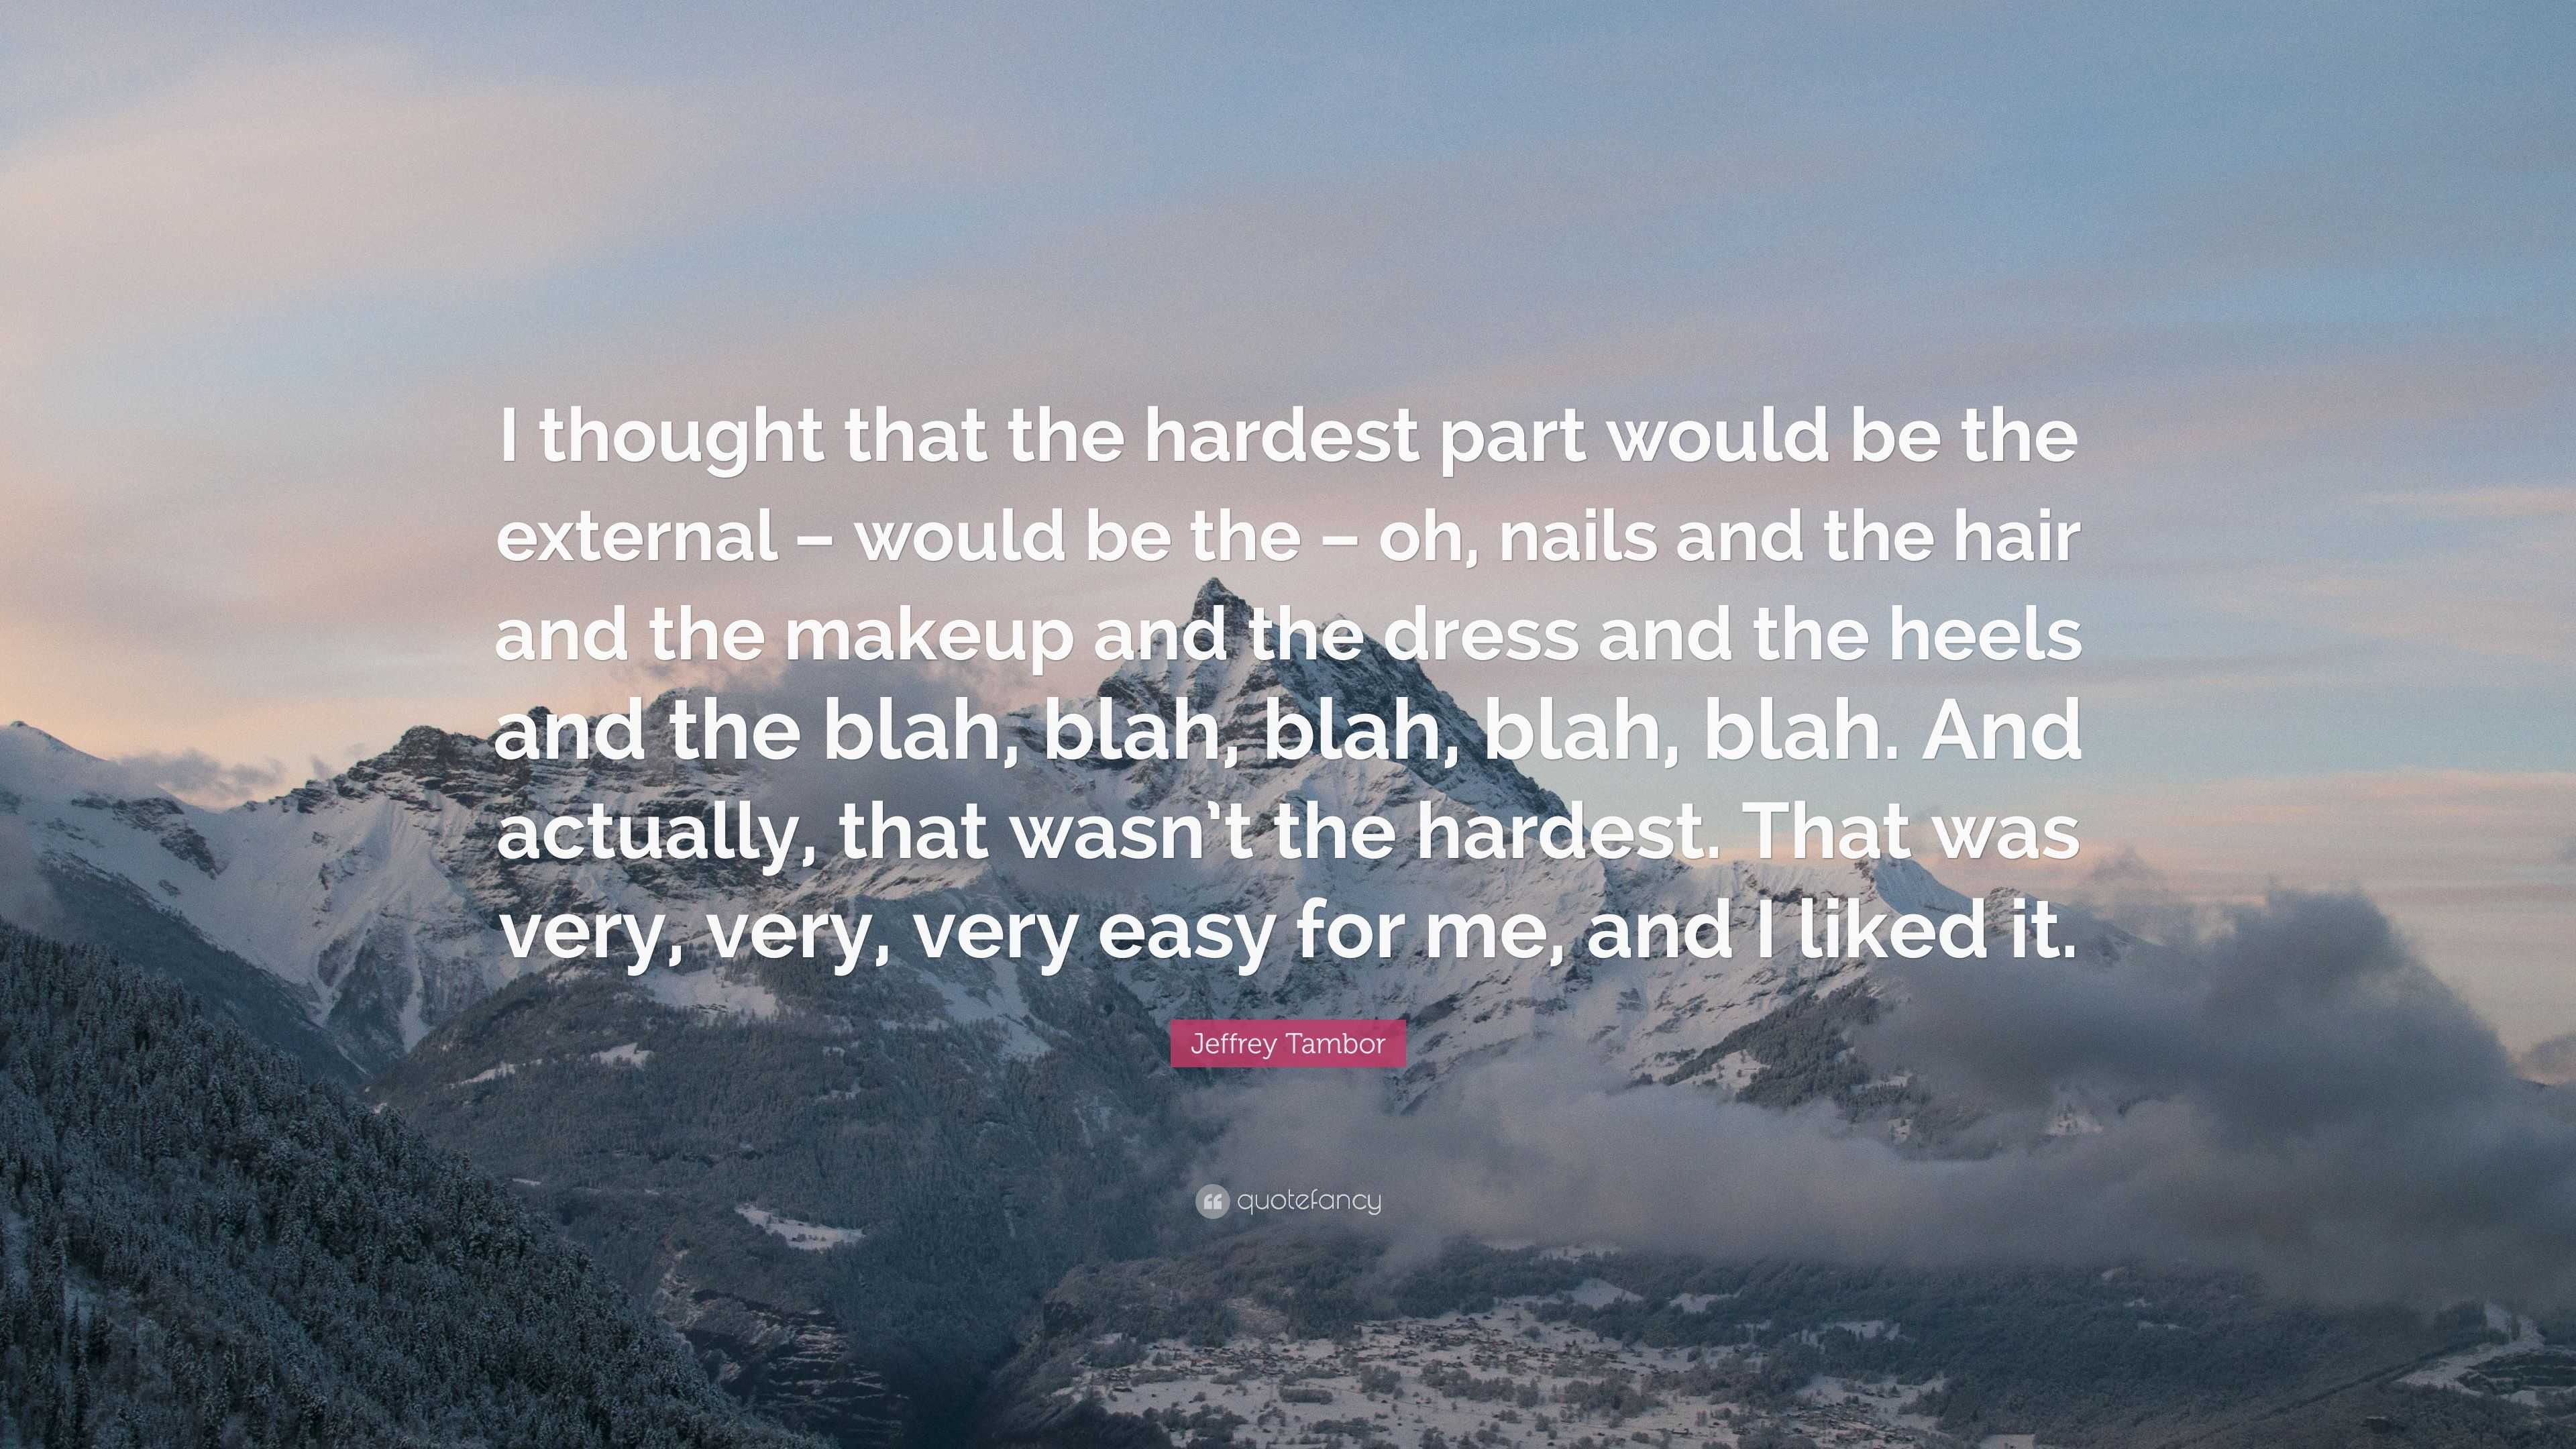 Jeffrey Tambor Quote: “I thought that the hardest part would be the ...